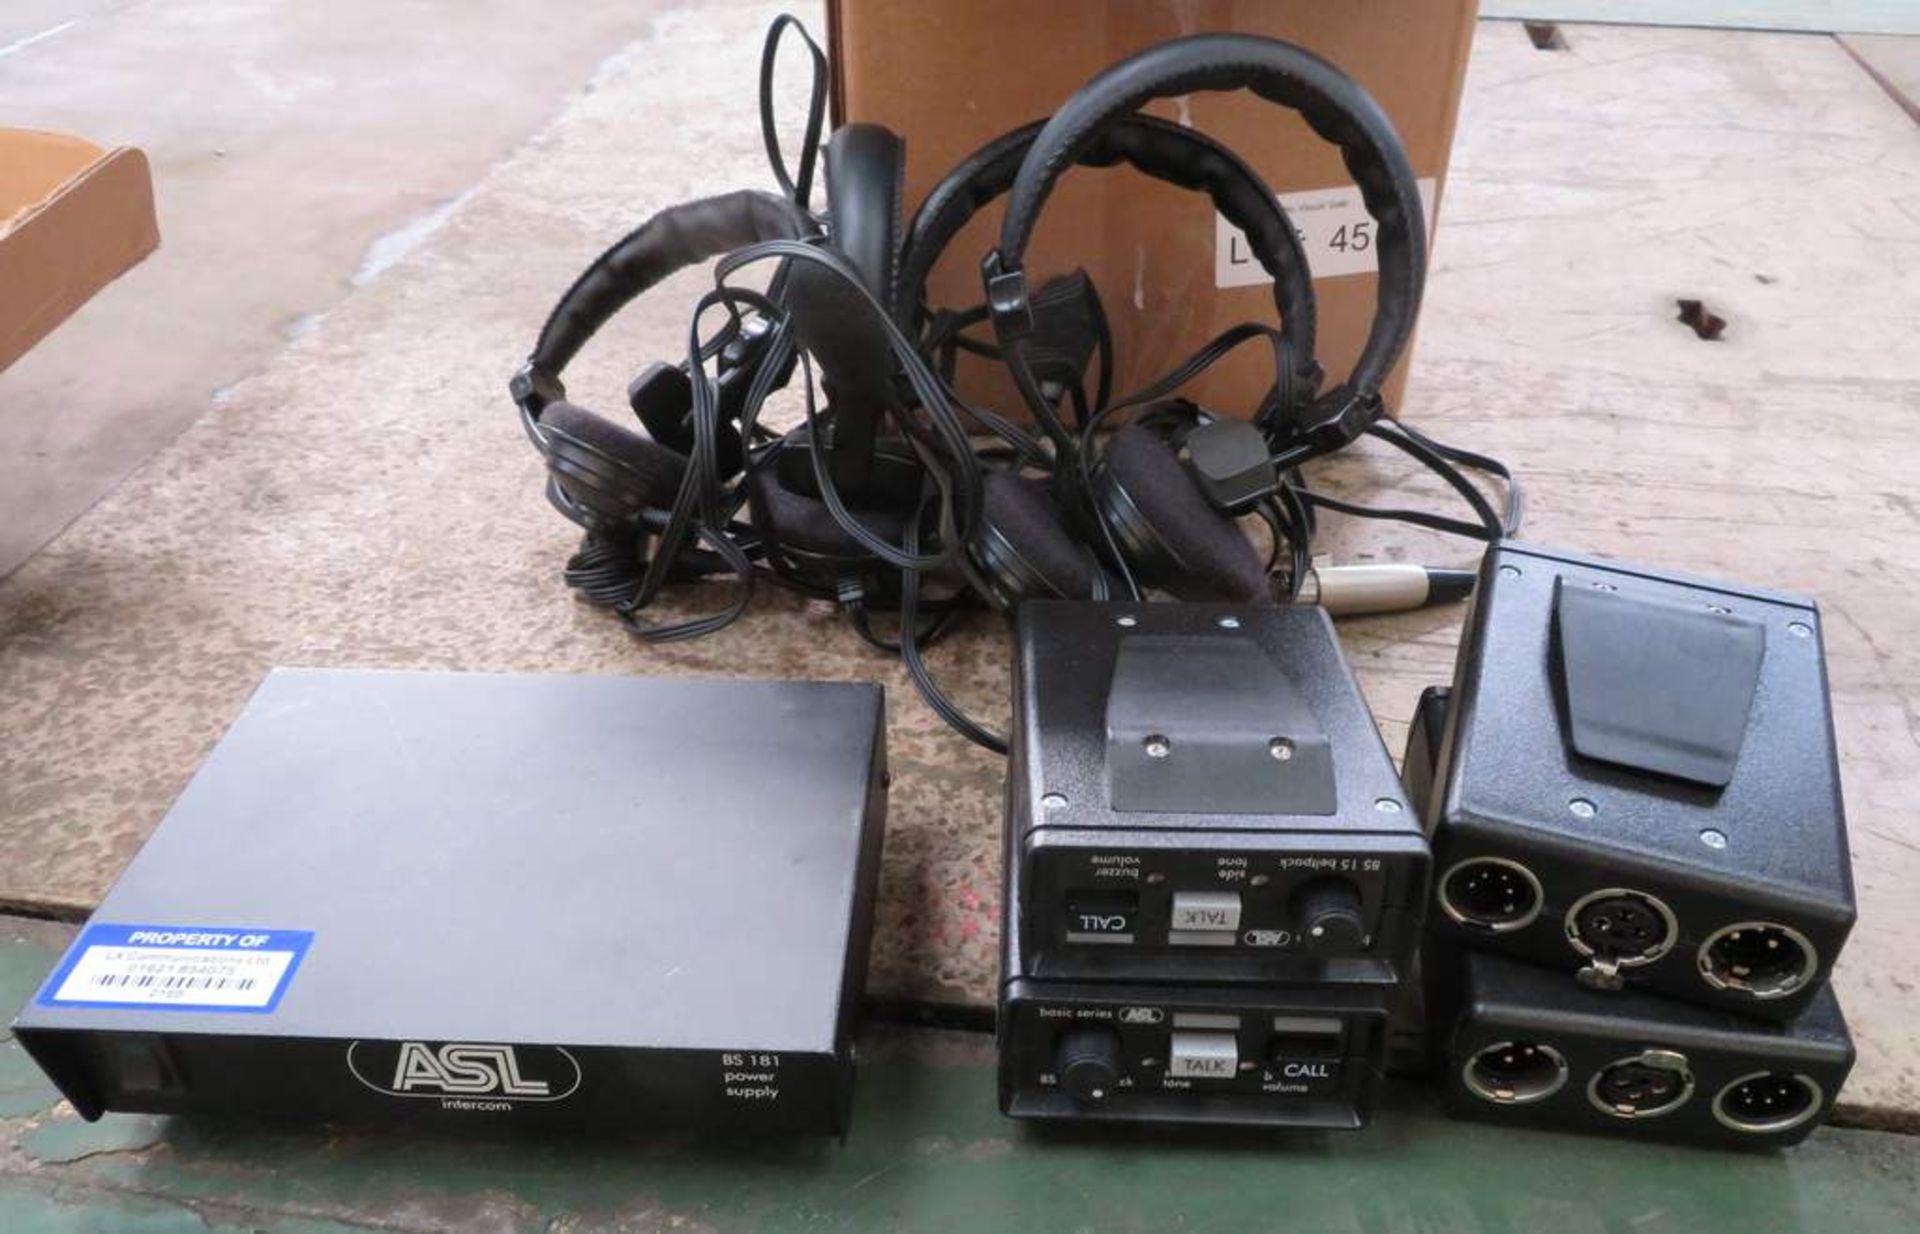 ASL4 station intercom system with power supply and headsets